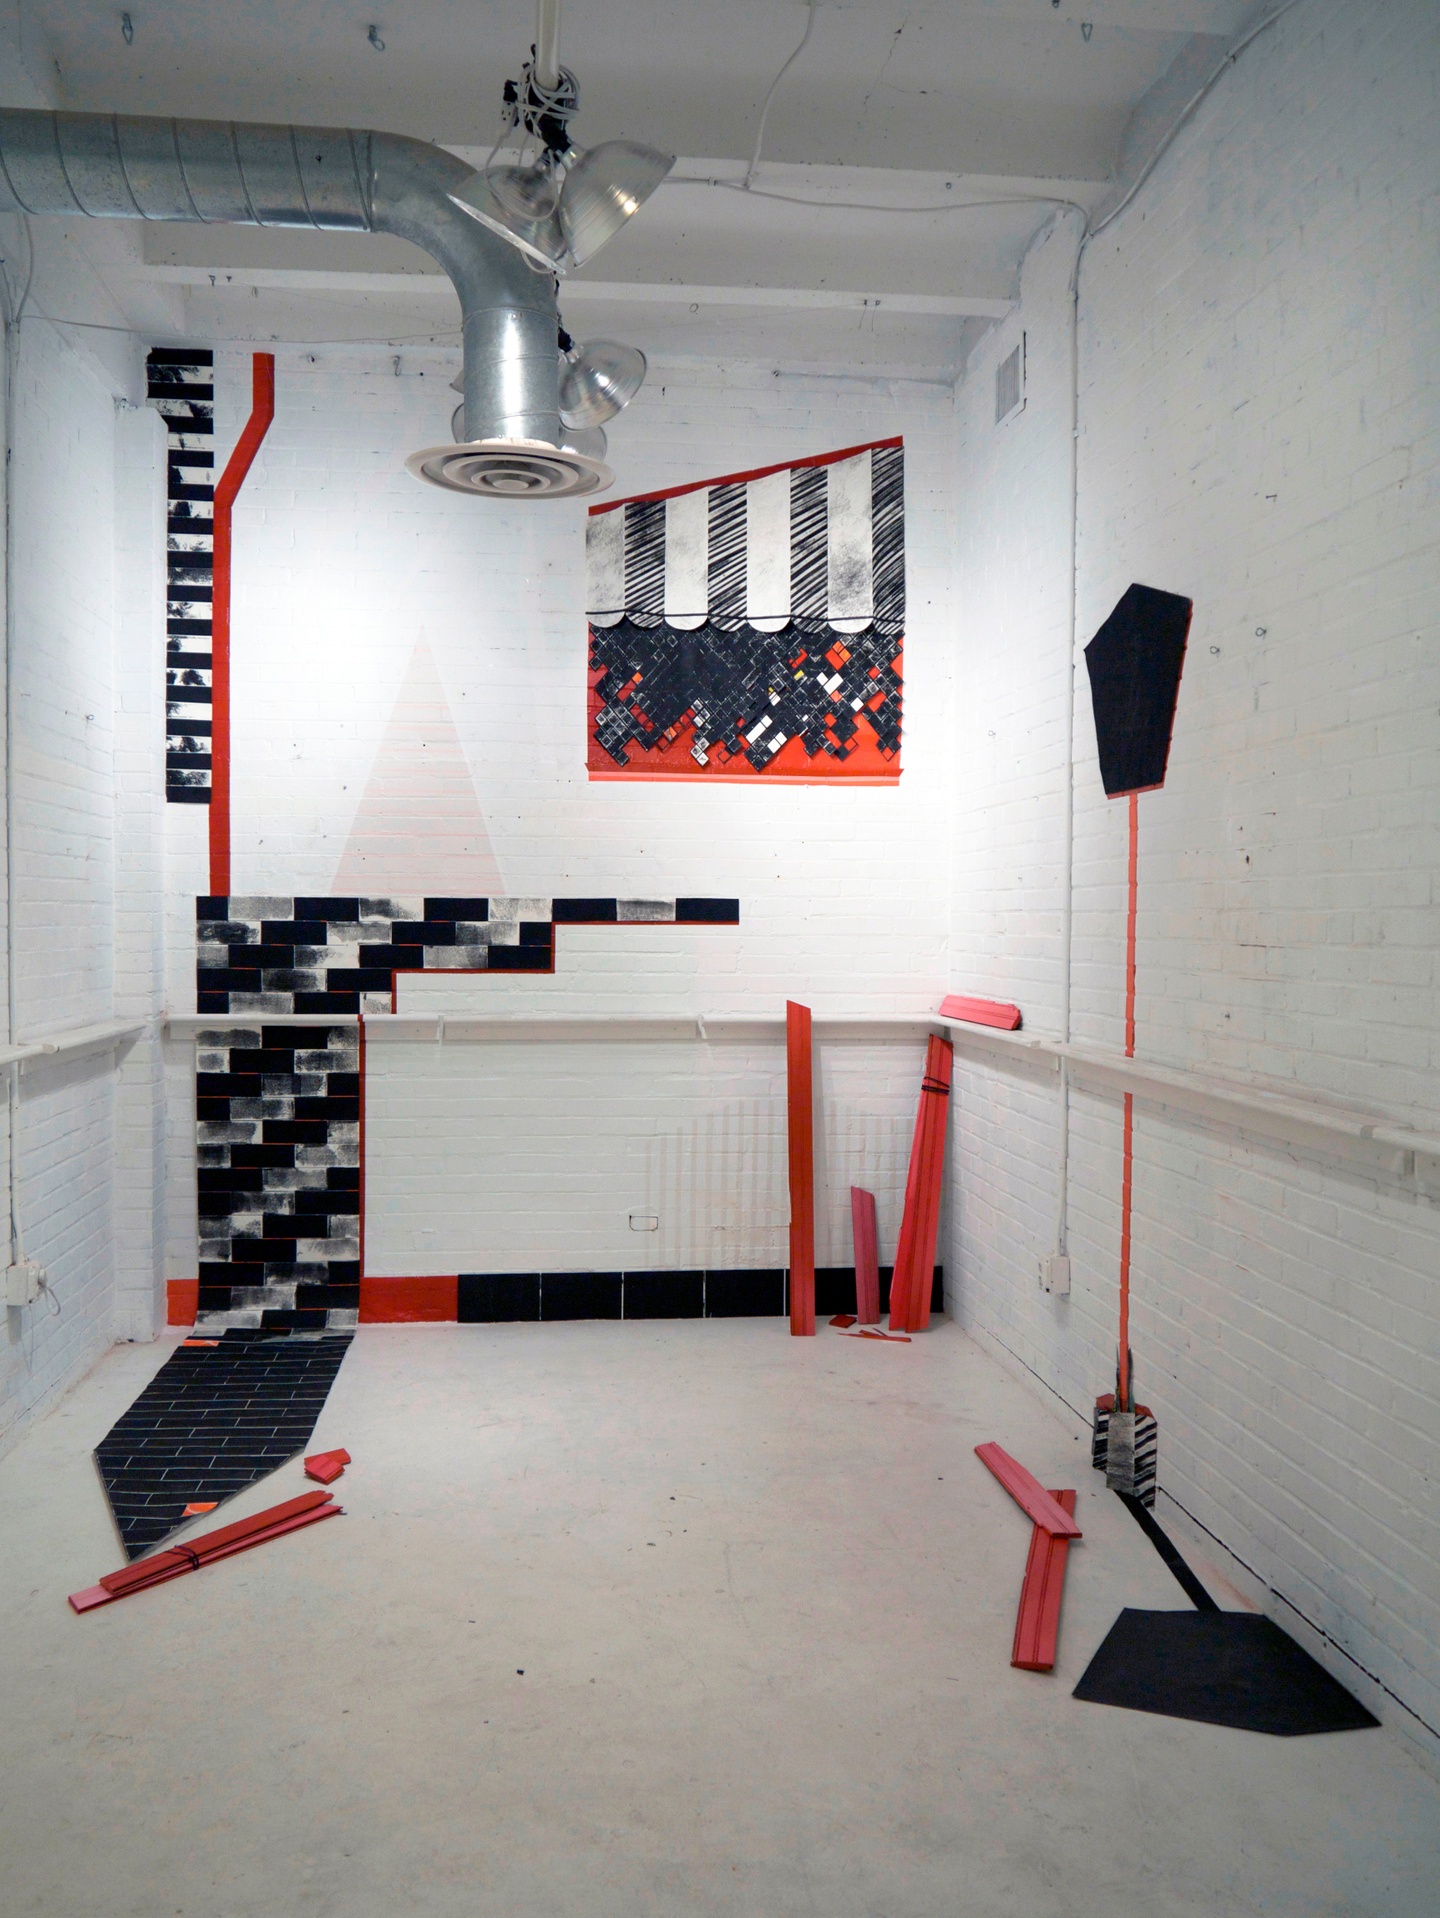 Against white brick walls and a white concrete floor, an installation: a black and white pattern tiled across some of the bricks in the wall lead to the upper edge of the wall; red tiles/material outlines some of the patterns, a few pieces of the red material also stacked together in the foreground.